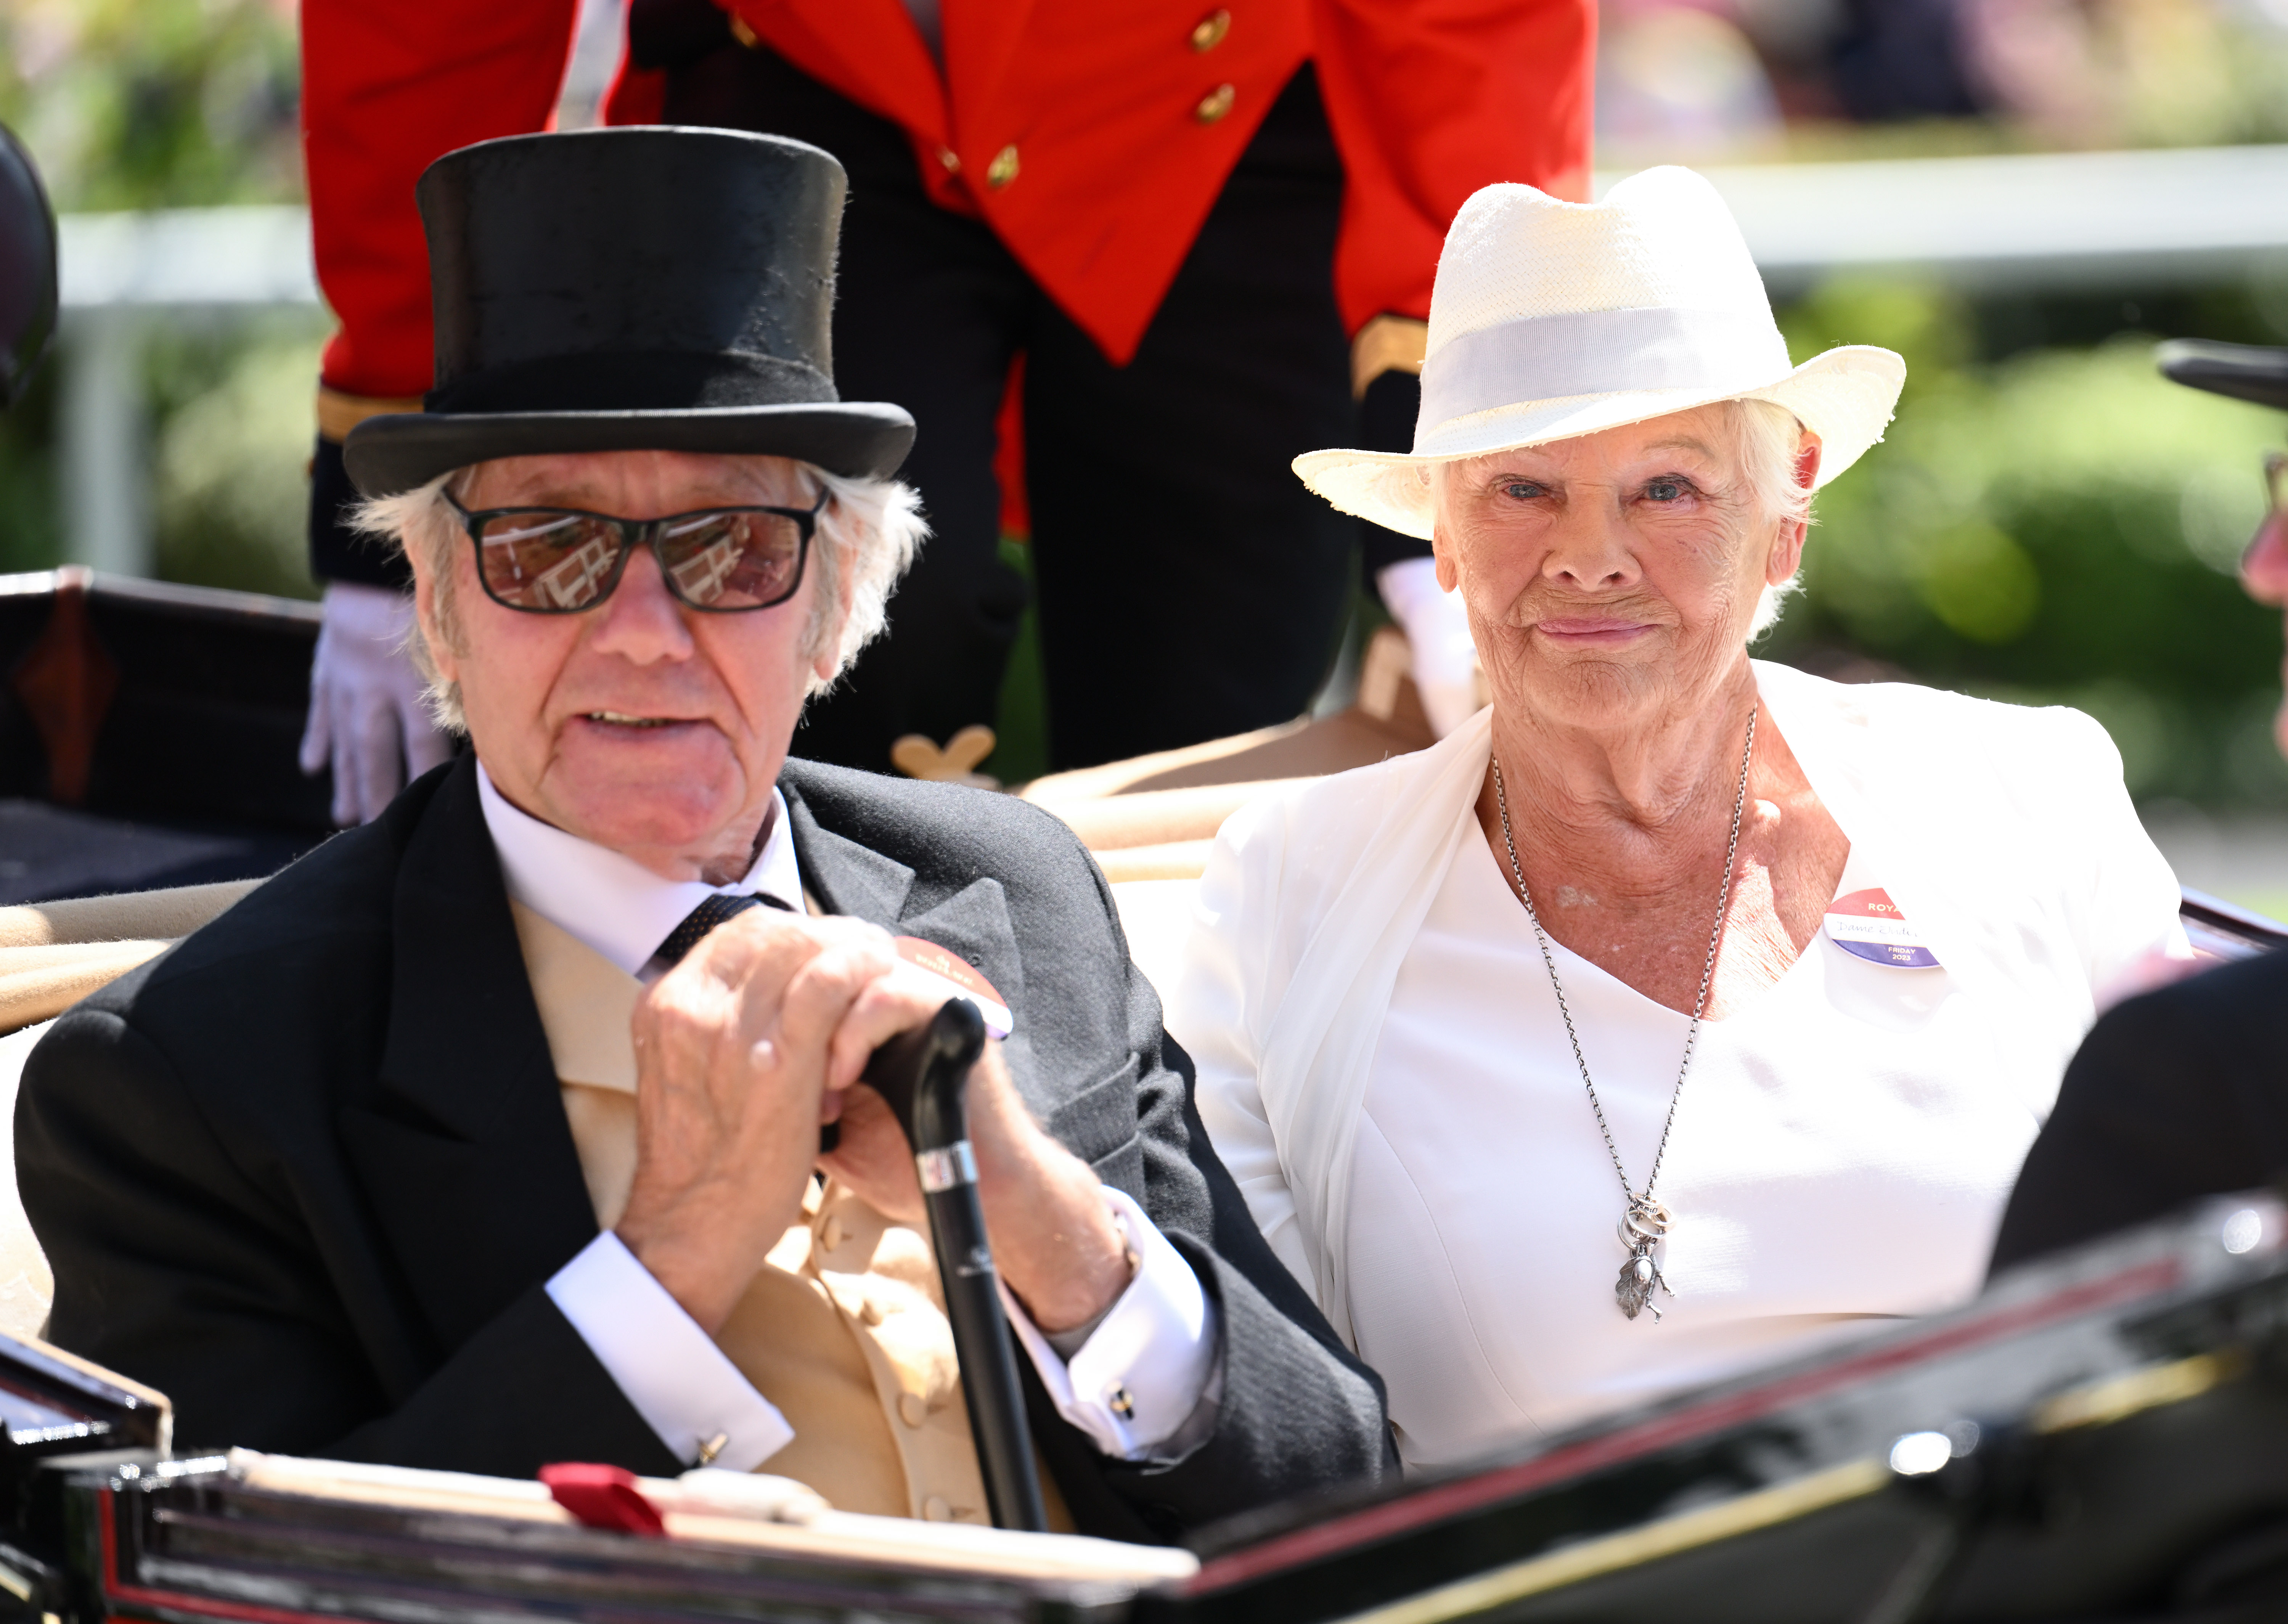 David Mills and Judi Dench on June 23, 2023 in Ascot, England. | Source: Getty Images